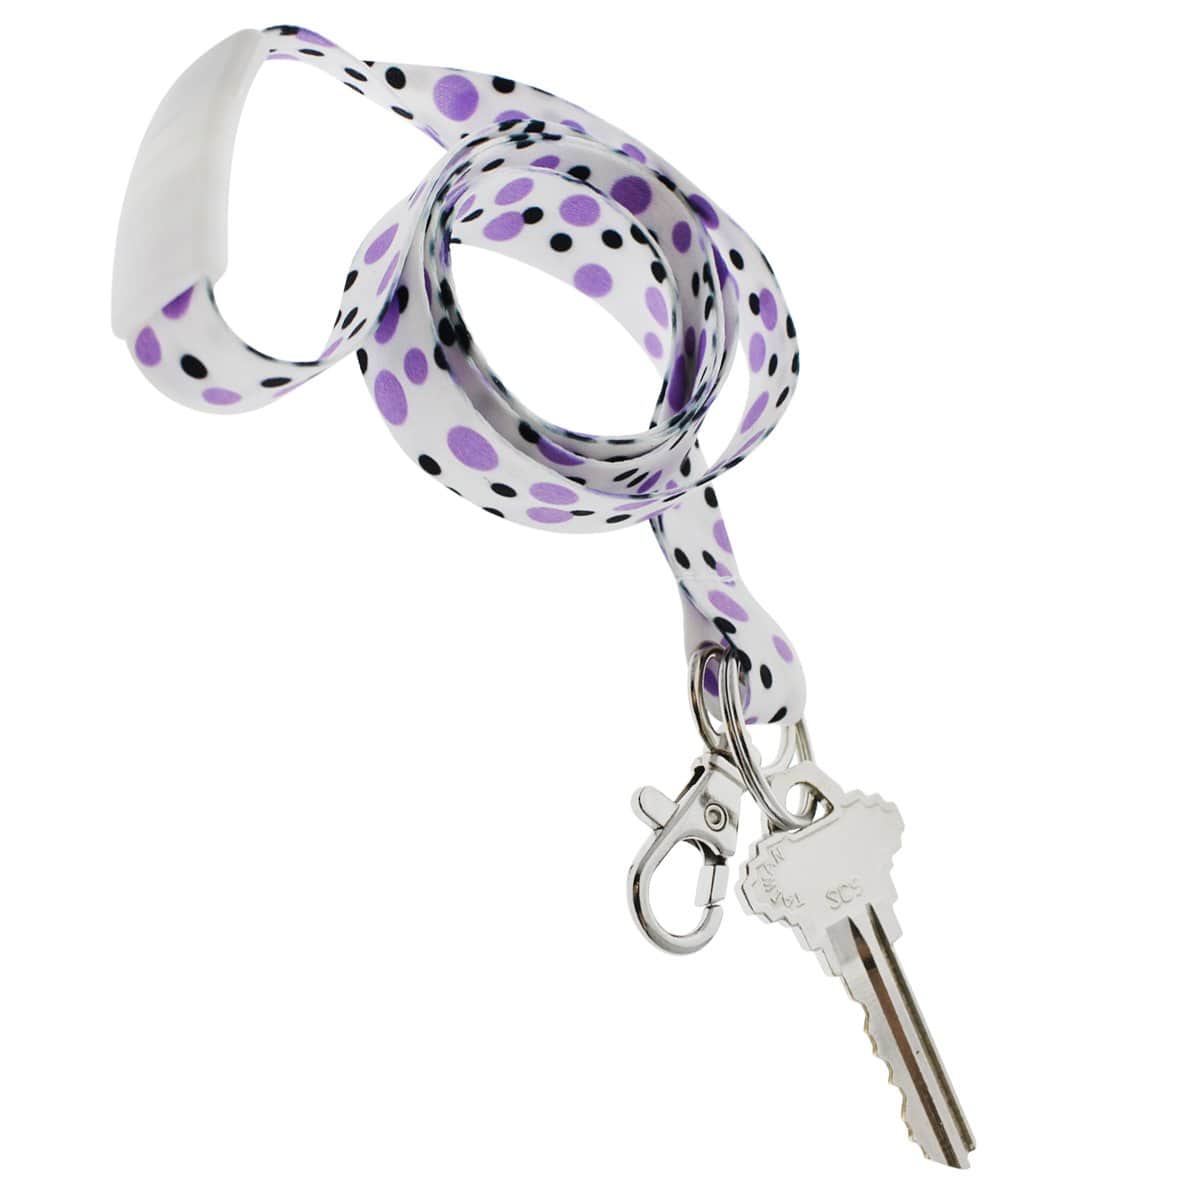 Cute Polka Dot Pattern Fashion Lanyard With Lobster Hook And Key Ring(P/N 2138-728X)